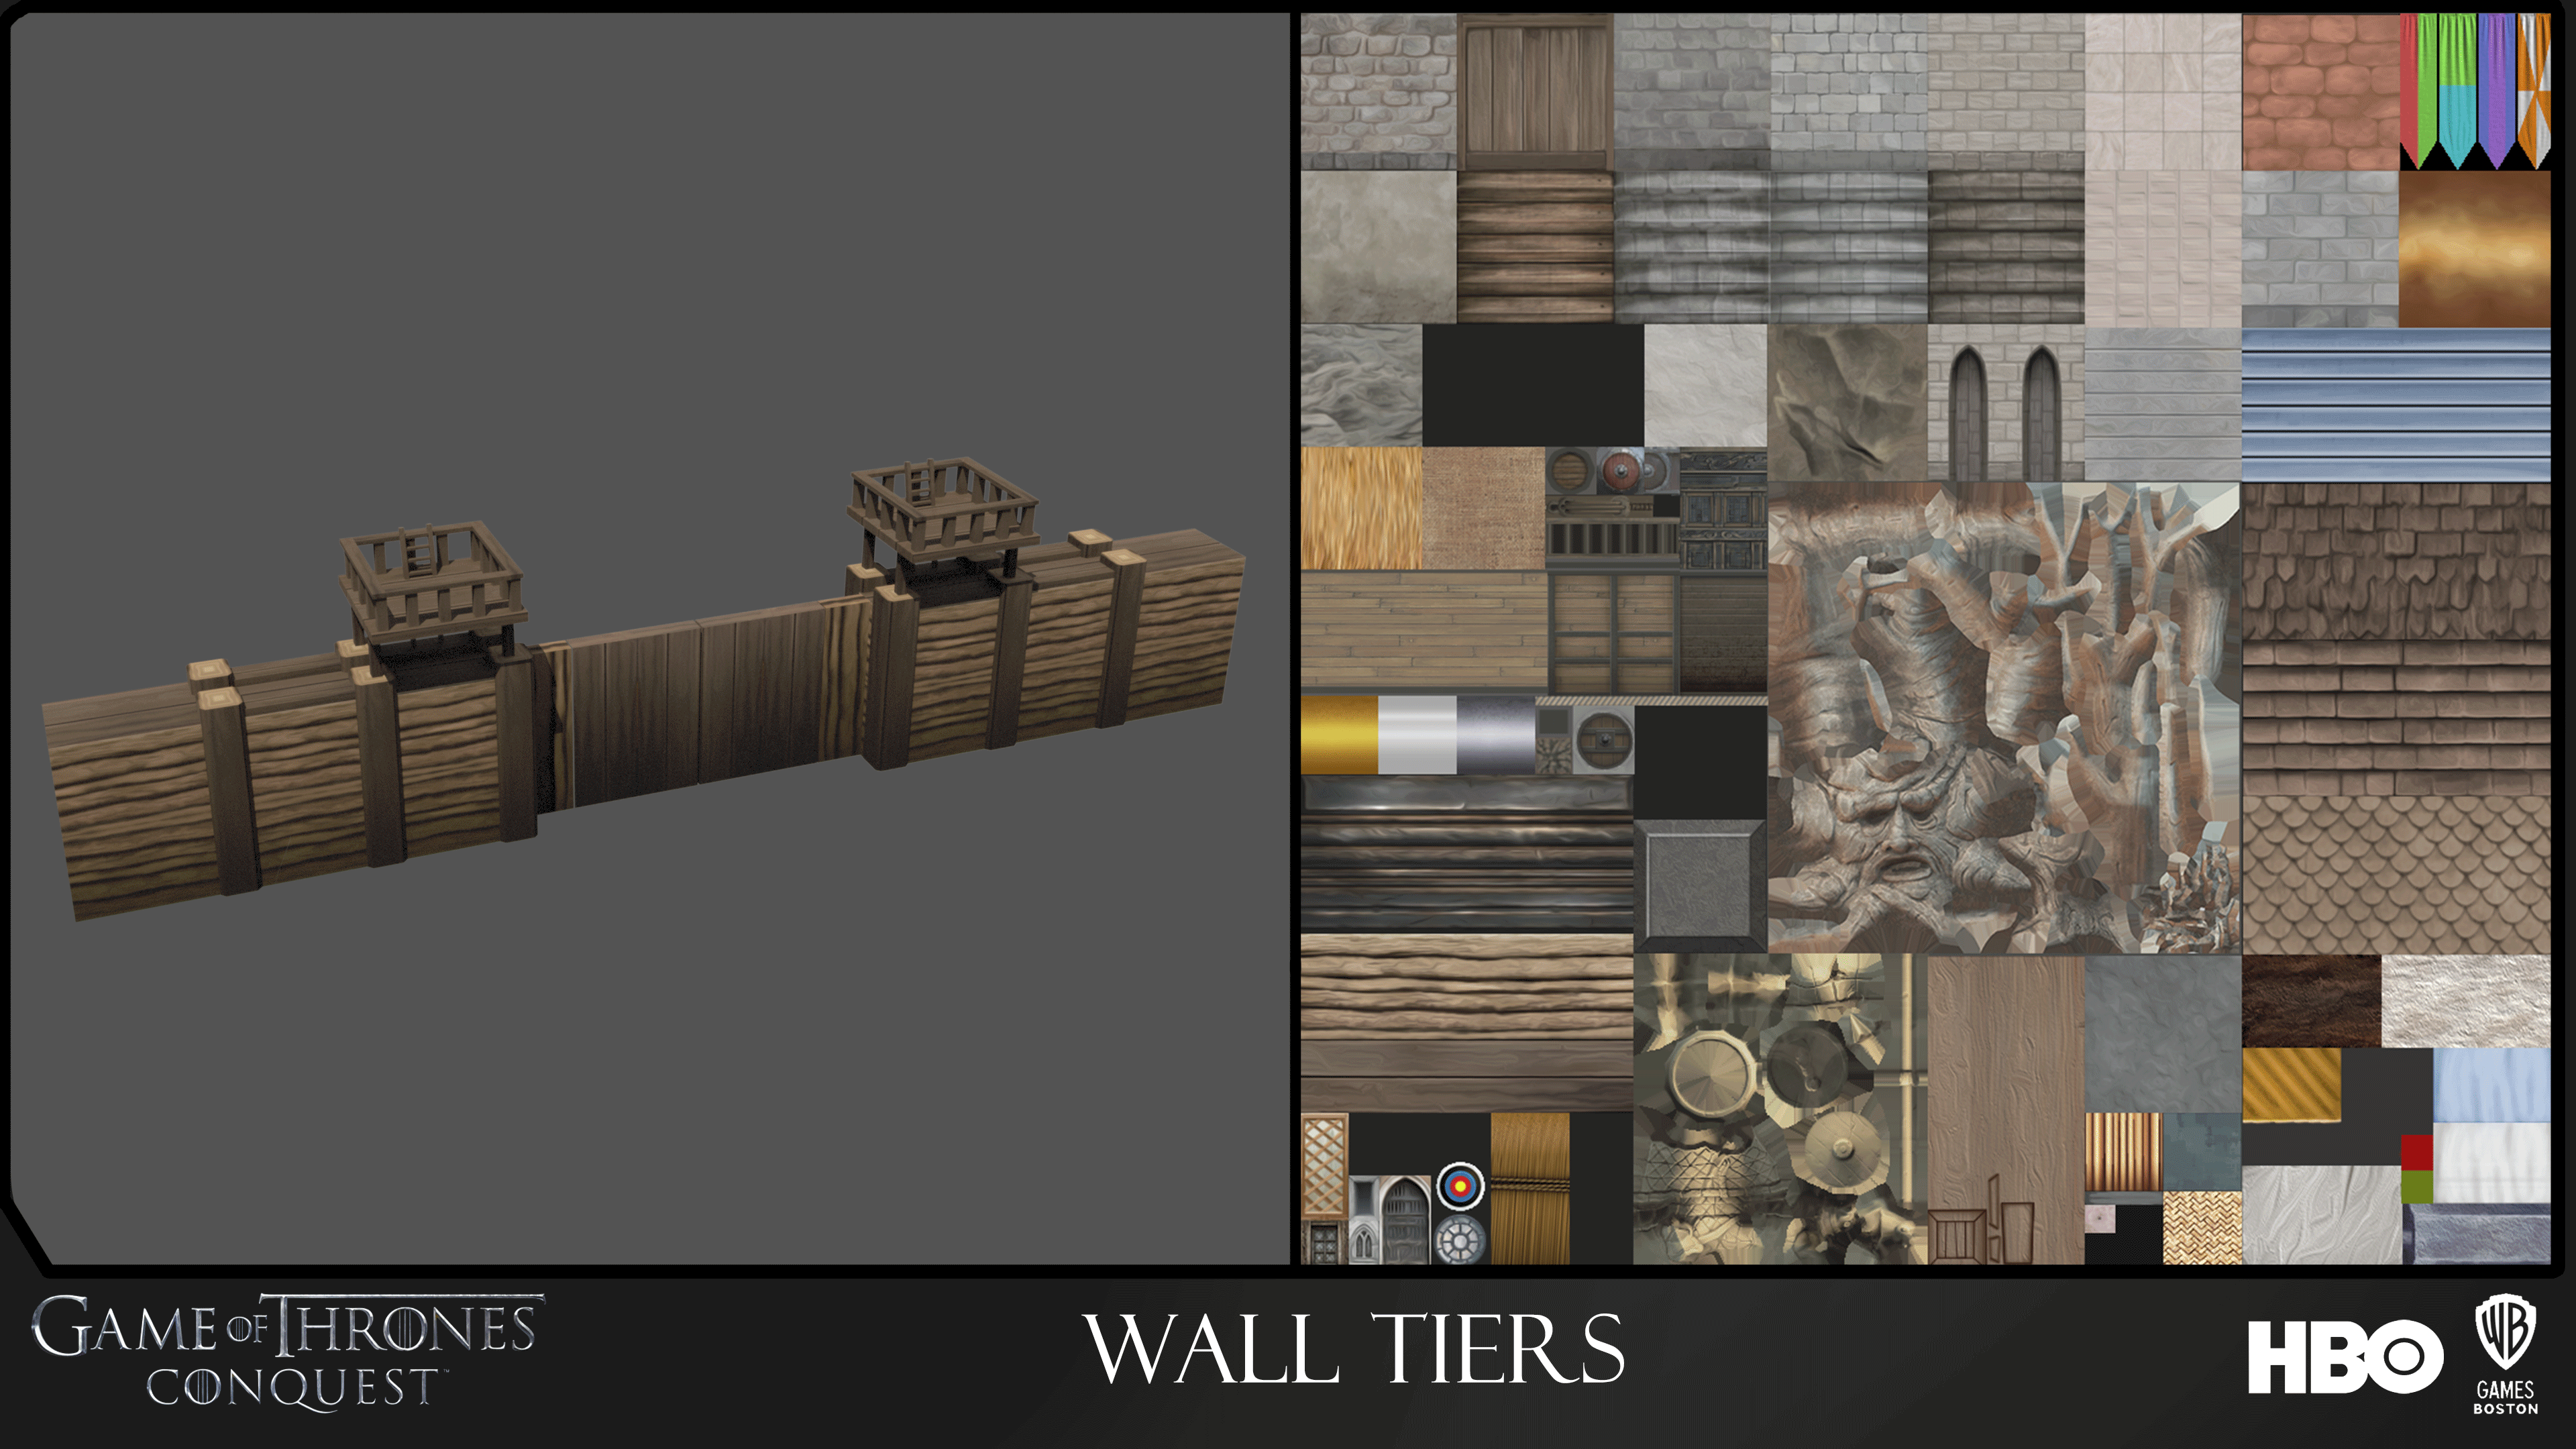 The Atlas seen here is a 1024 used on all buildings. I modeled, textured, UV'd, and baked all wall tiers. The atlas was a combined effort by all artists on the project.